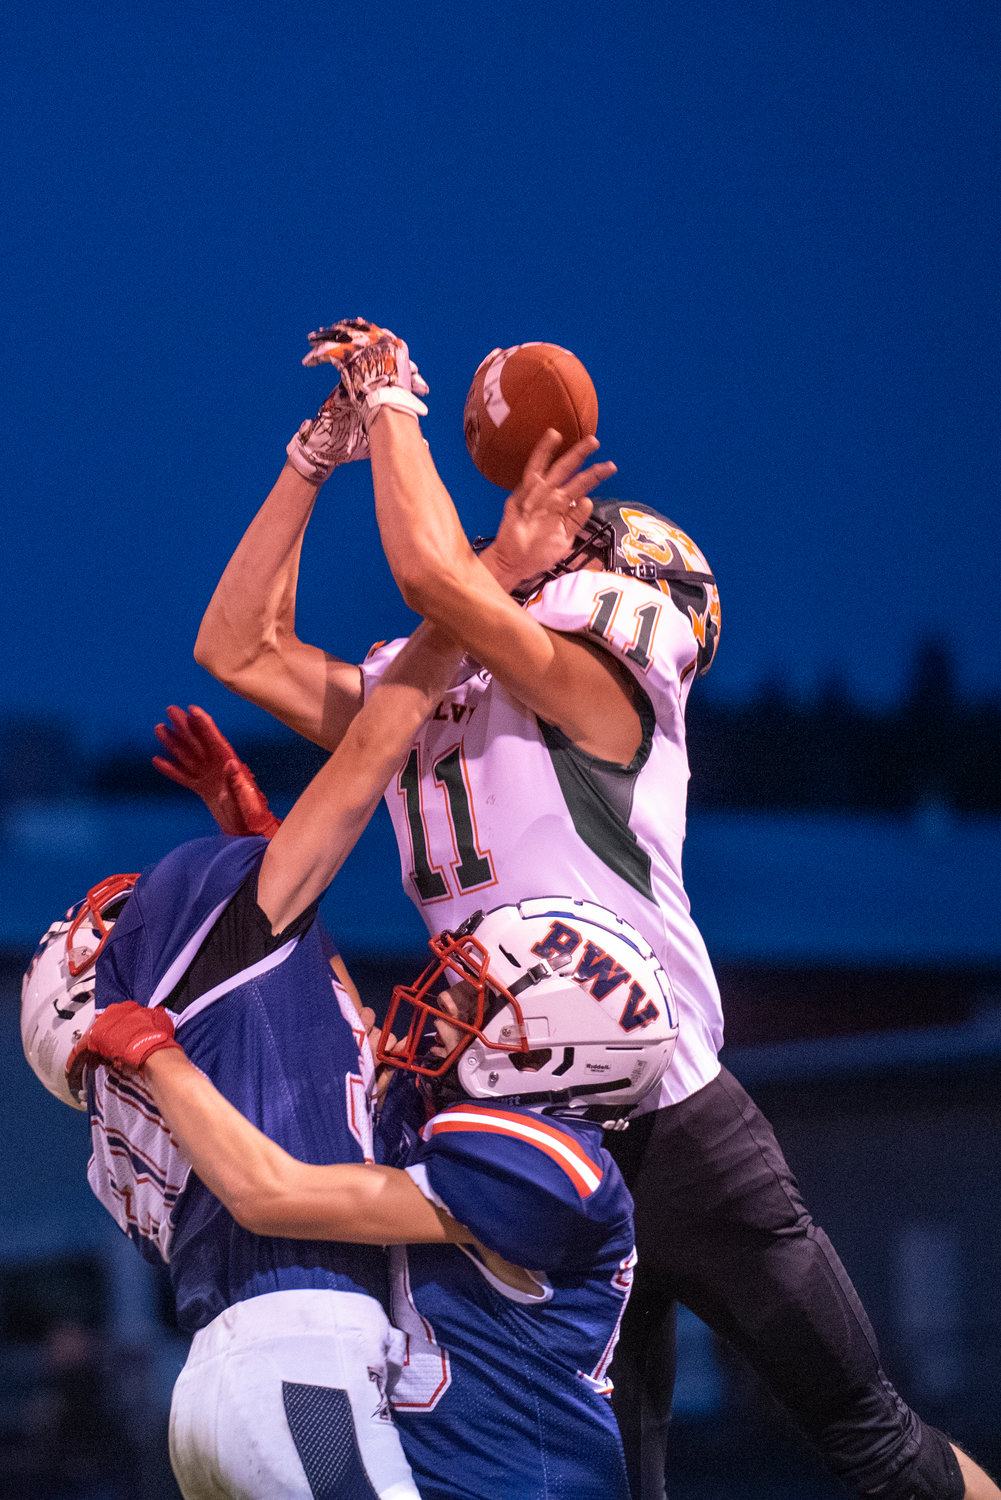 PWV's Kaidan Perkins (30) and Tyson Portmann (10) break up a pass intended for MWP's Hunter Hazen (11) during the second quarter on Friday, Oct. 1, 2021.